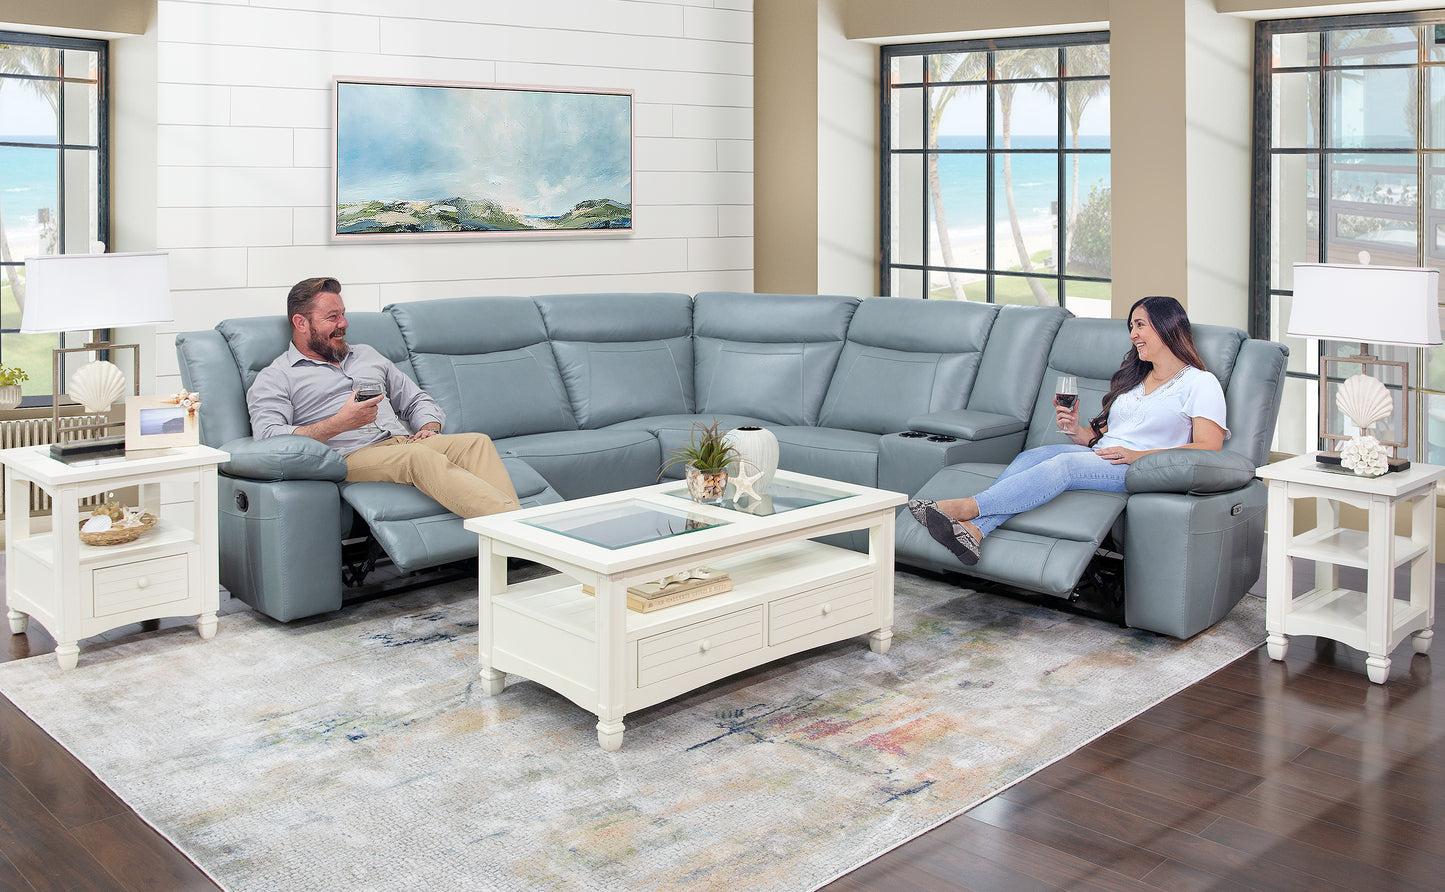 Dallas Teal 6 Piece Leather Reclining Sectional